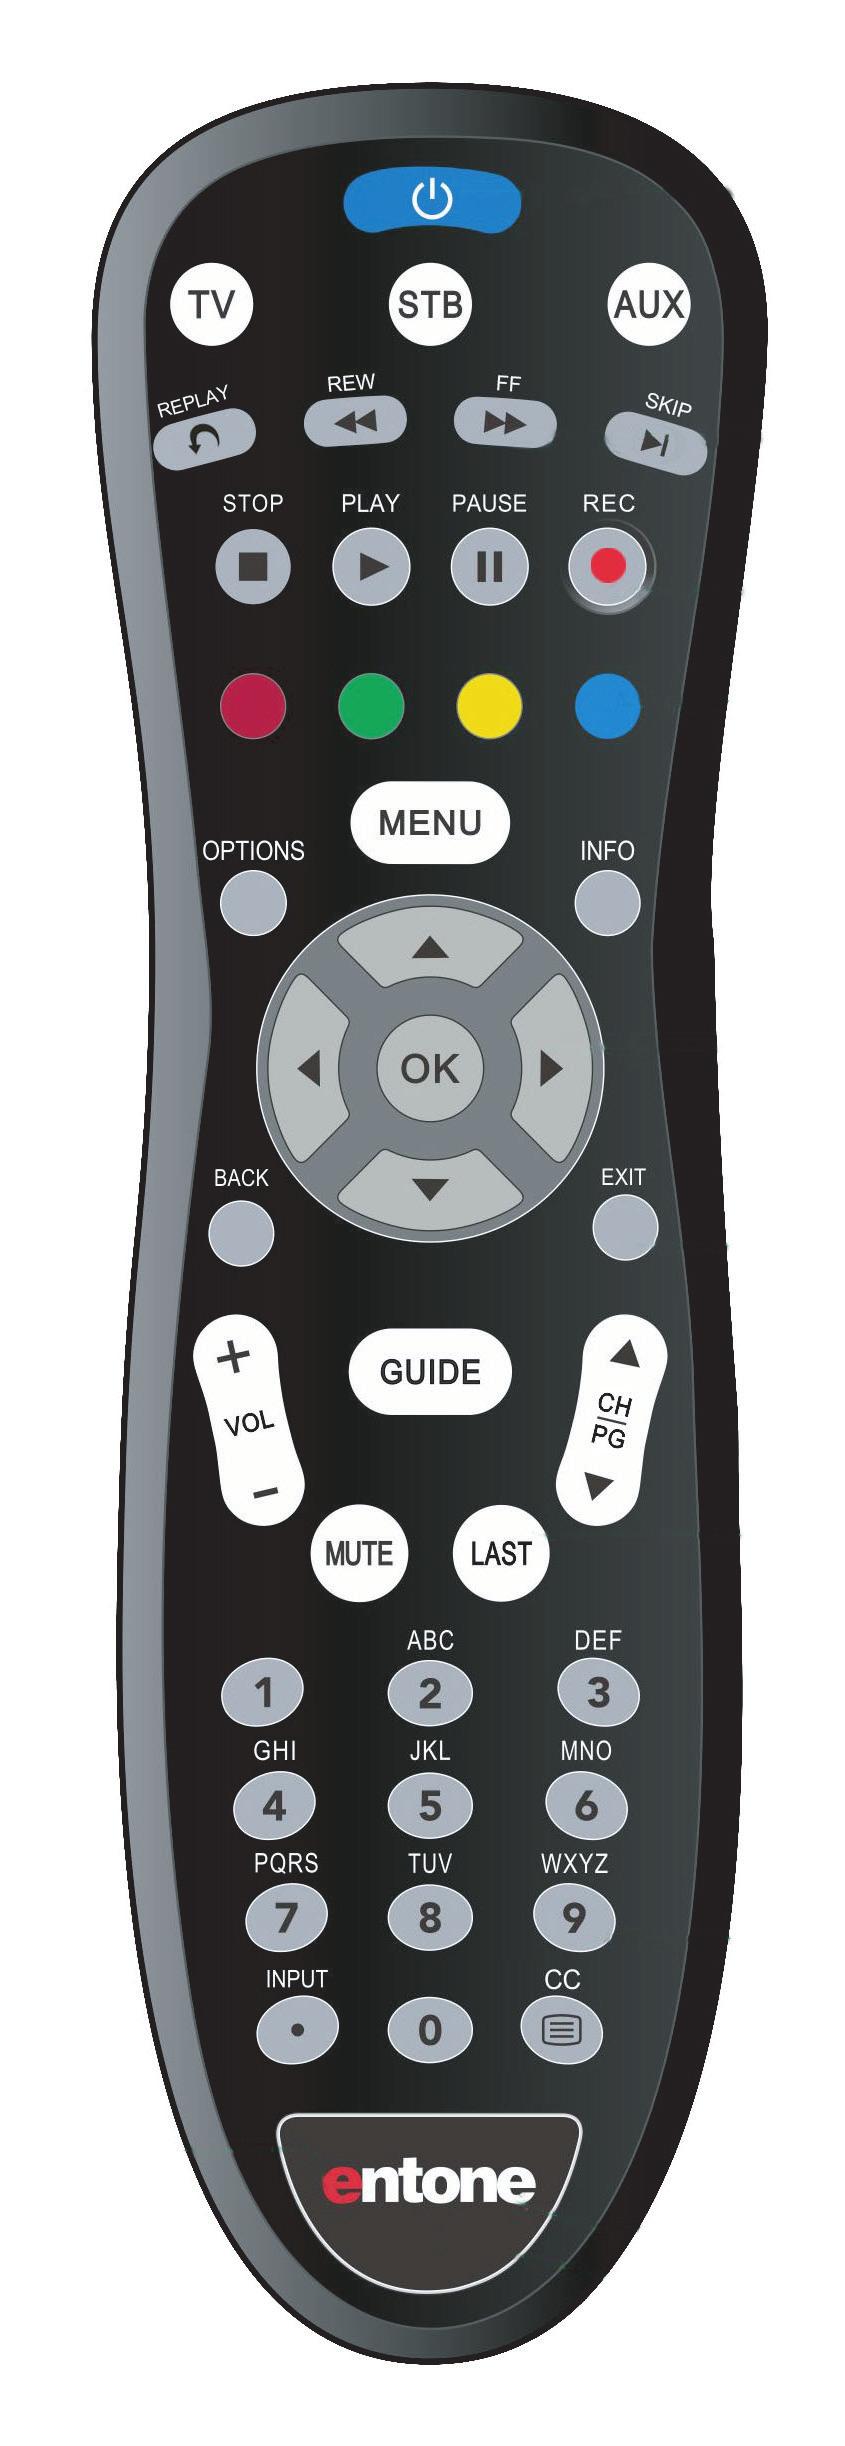 1 Remote Control Basics Device Selection Press to control your TV, STB, or Auxiliary Device Playback Controls Control playback of DVD or DVR Function Buttons For future use OPTIONS Settings for